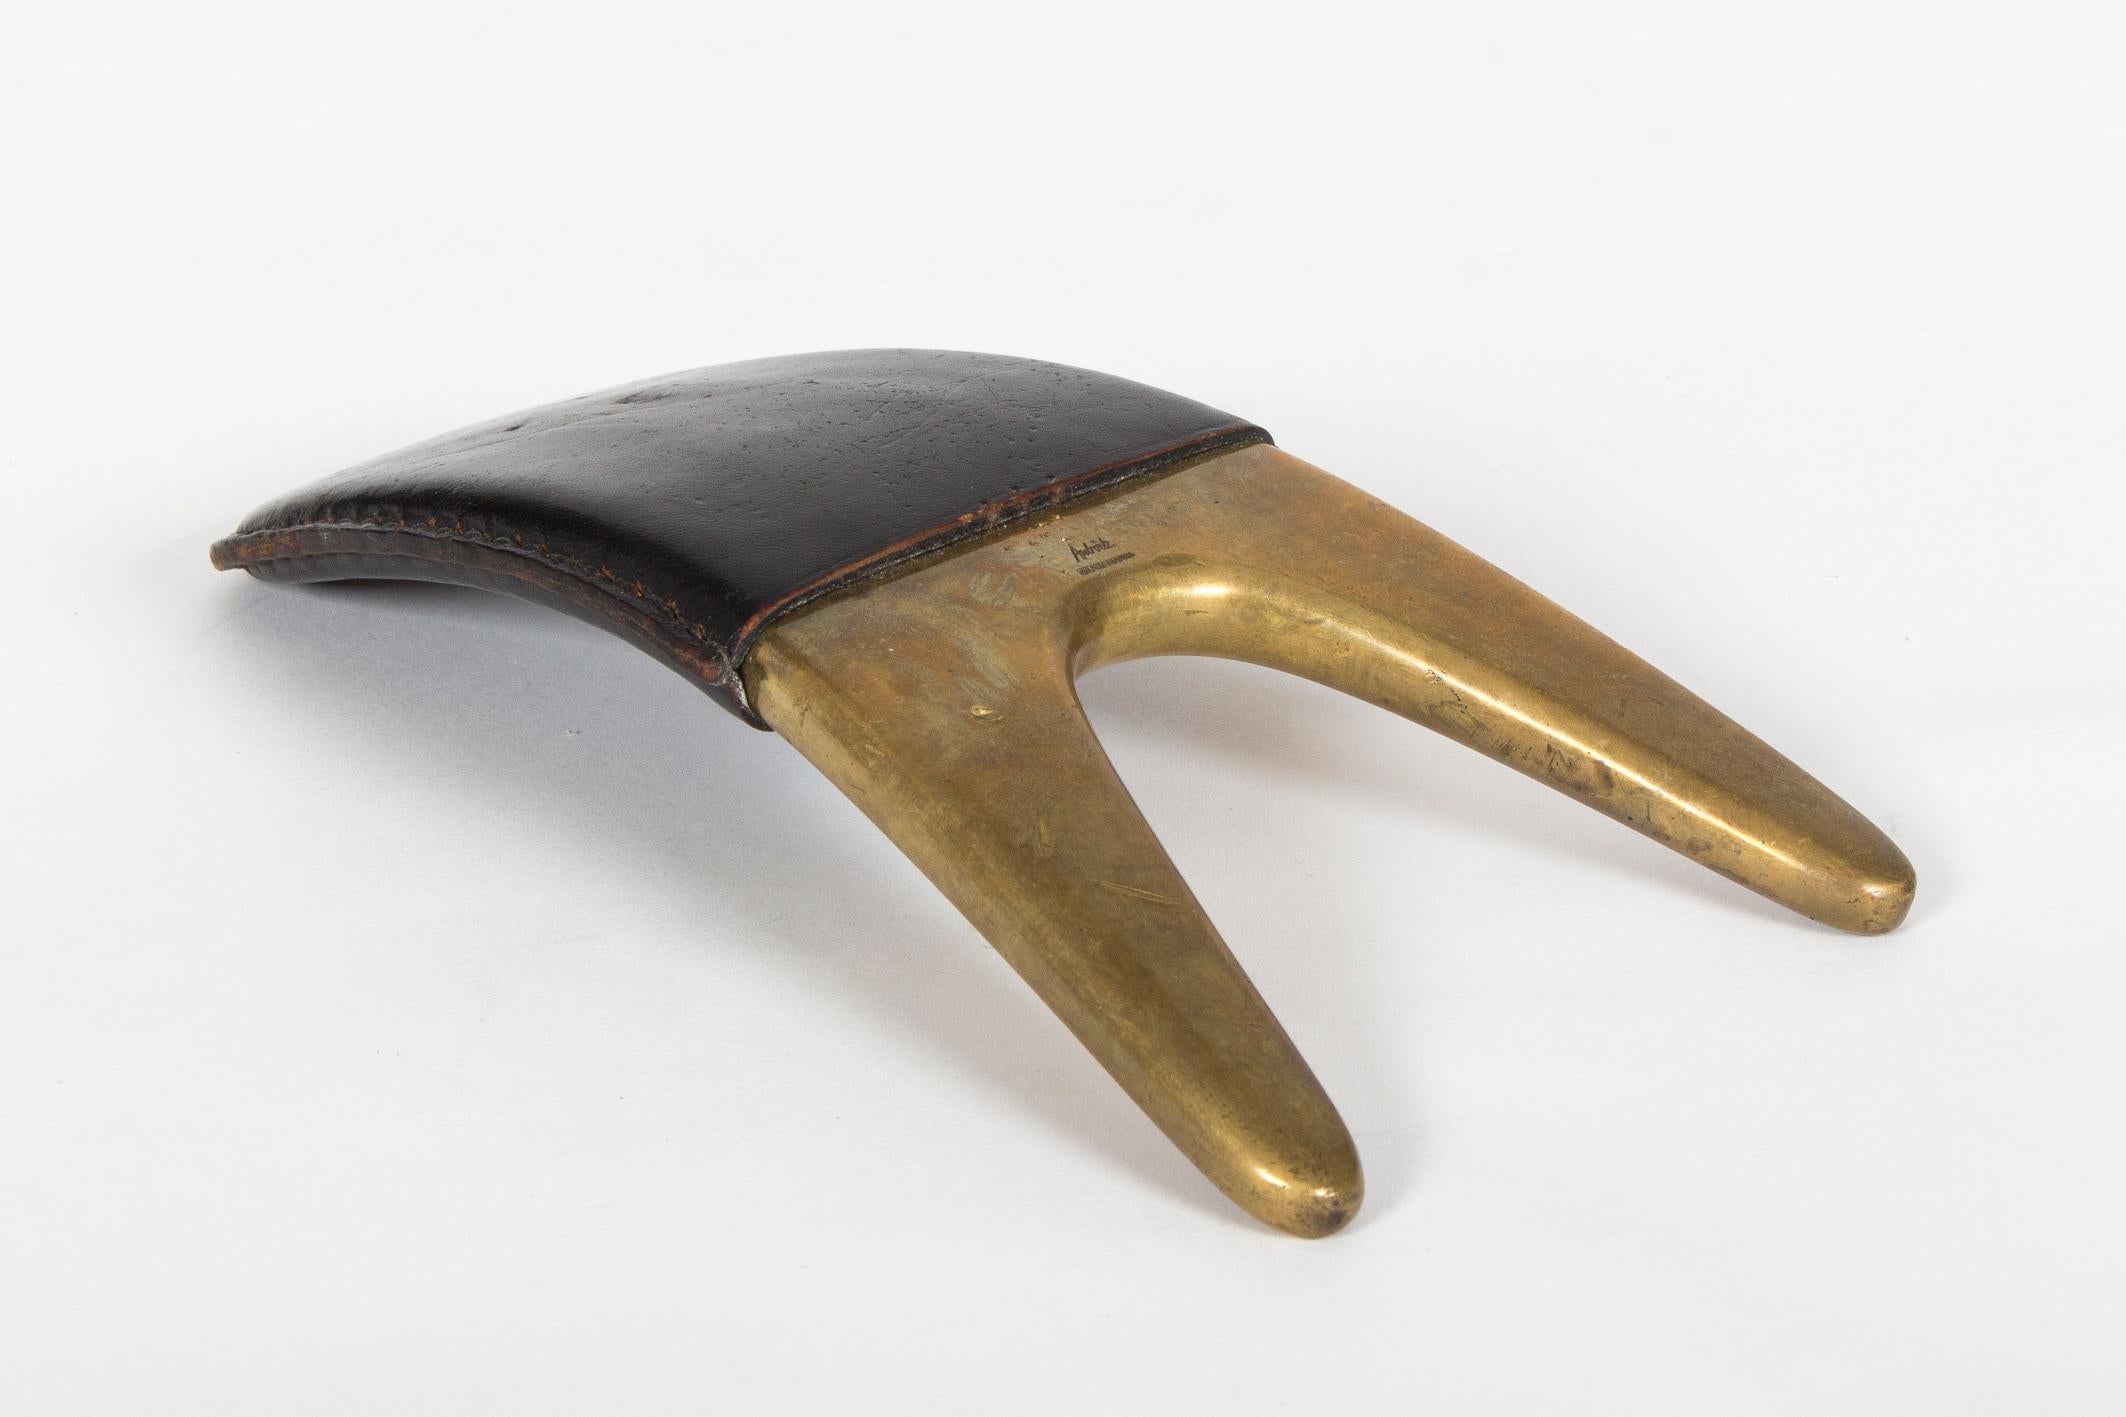 A rare collectors find from the Auböck workshop.
The well-shaped object functions as a boot jack and is made from the characteristic combination of heavy brass and leather. Marked on top, traces of ware and tear all over.